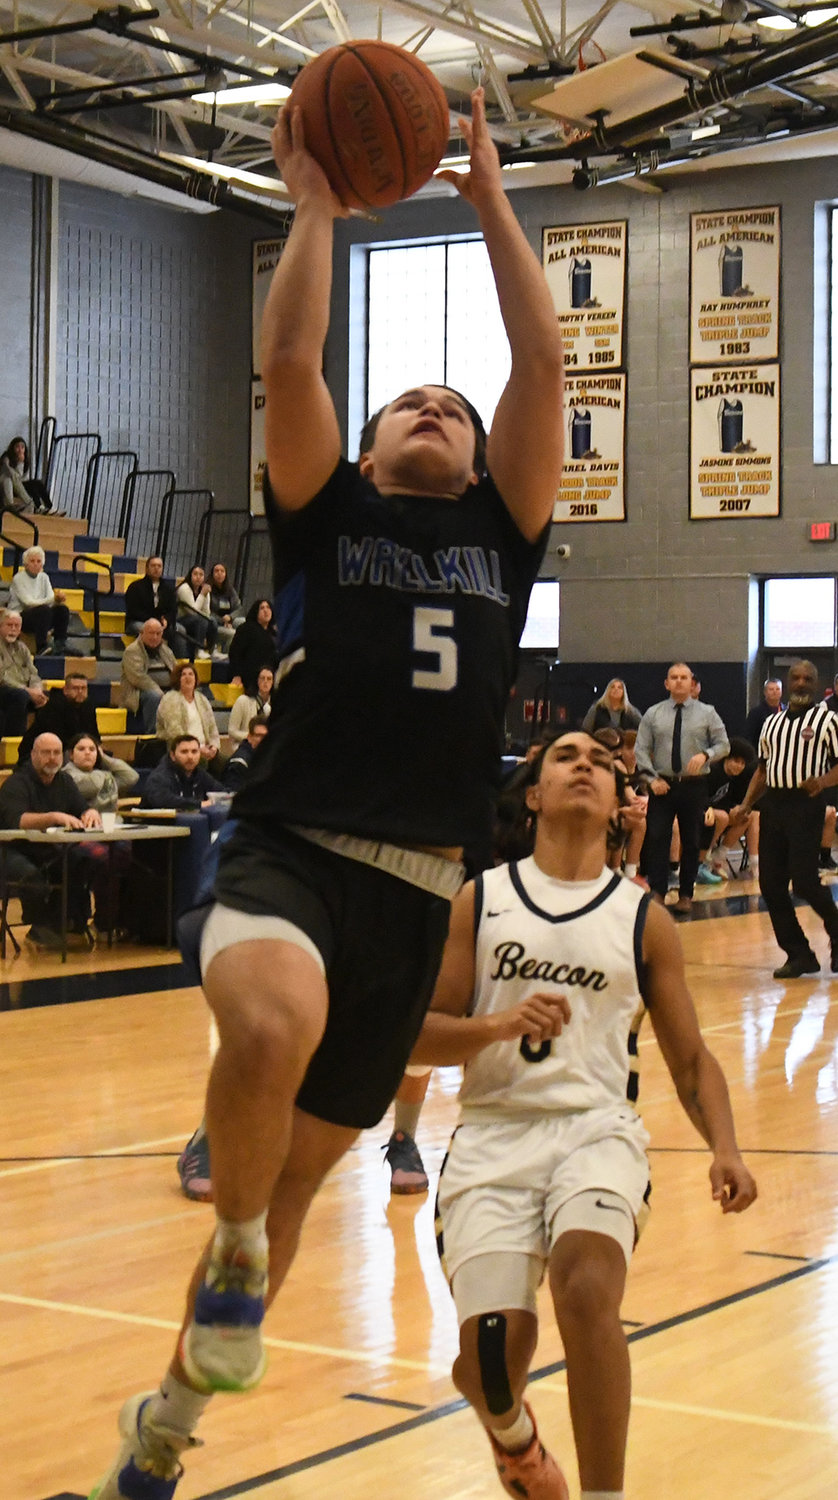 Wallkill's Mason Ondreyko goes up for a shot as Beacon's Adrian Beato trails the play during a Section 9 Class A quarterfinal boys' basketball game on Feb. 27 at Beacon High School.